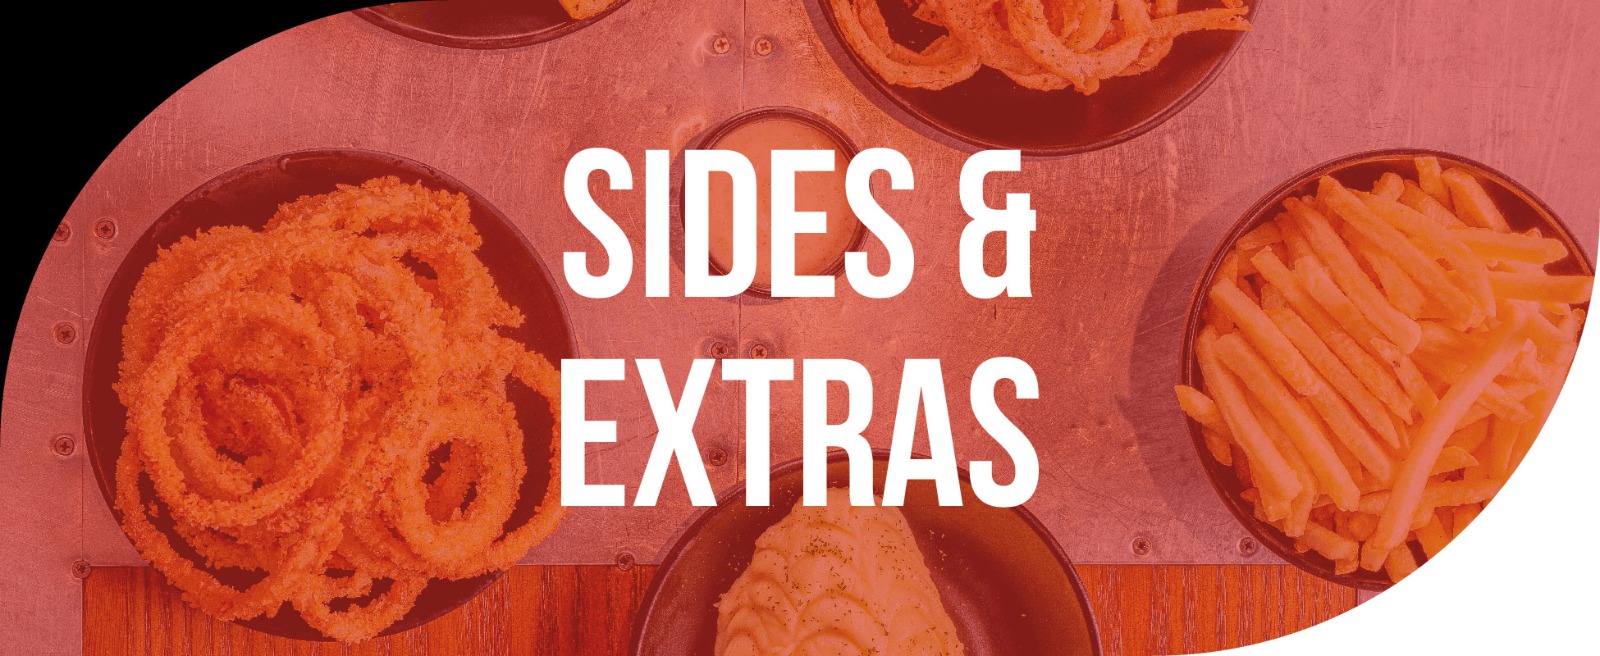 Sides & Extras